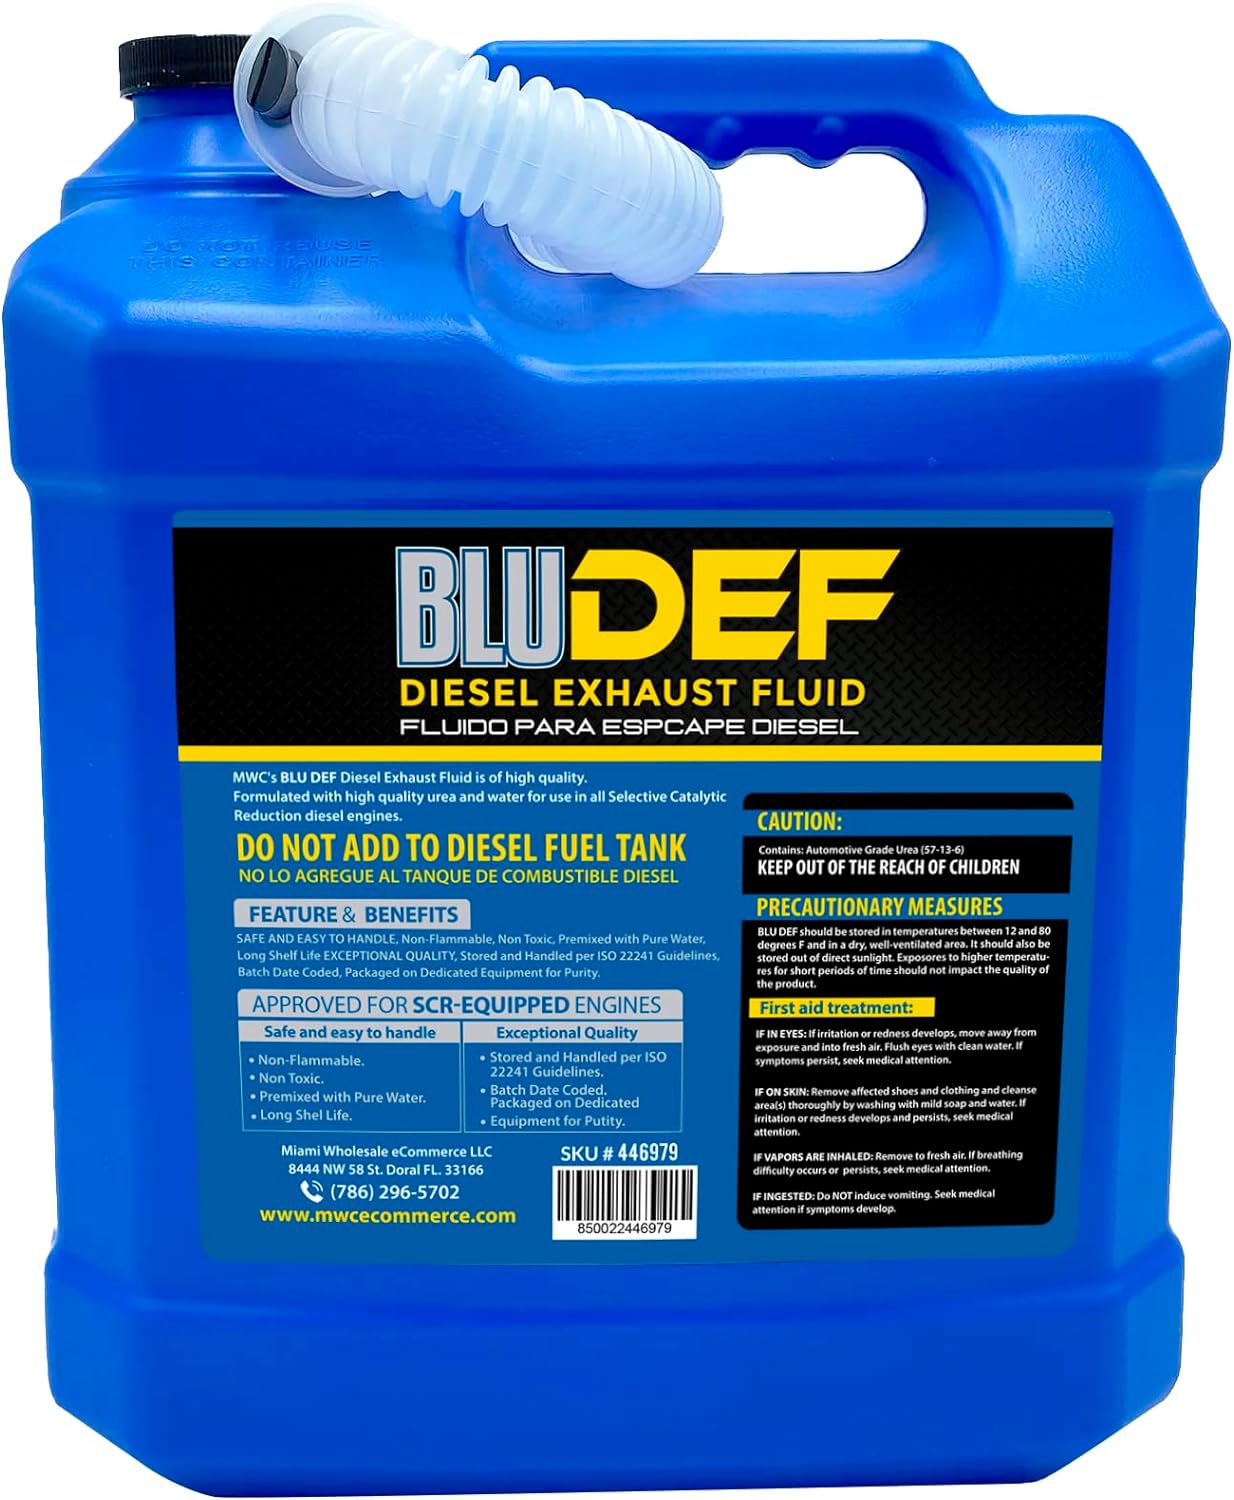 MWC BLUE DEF is a safe, easy-to-handle nontoxic solution of 67.5% water and 32.5% automotive grade urea. It is a stable fluid that is colorless and odorless.